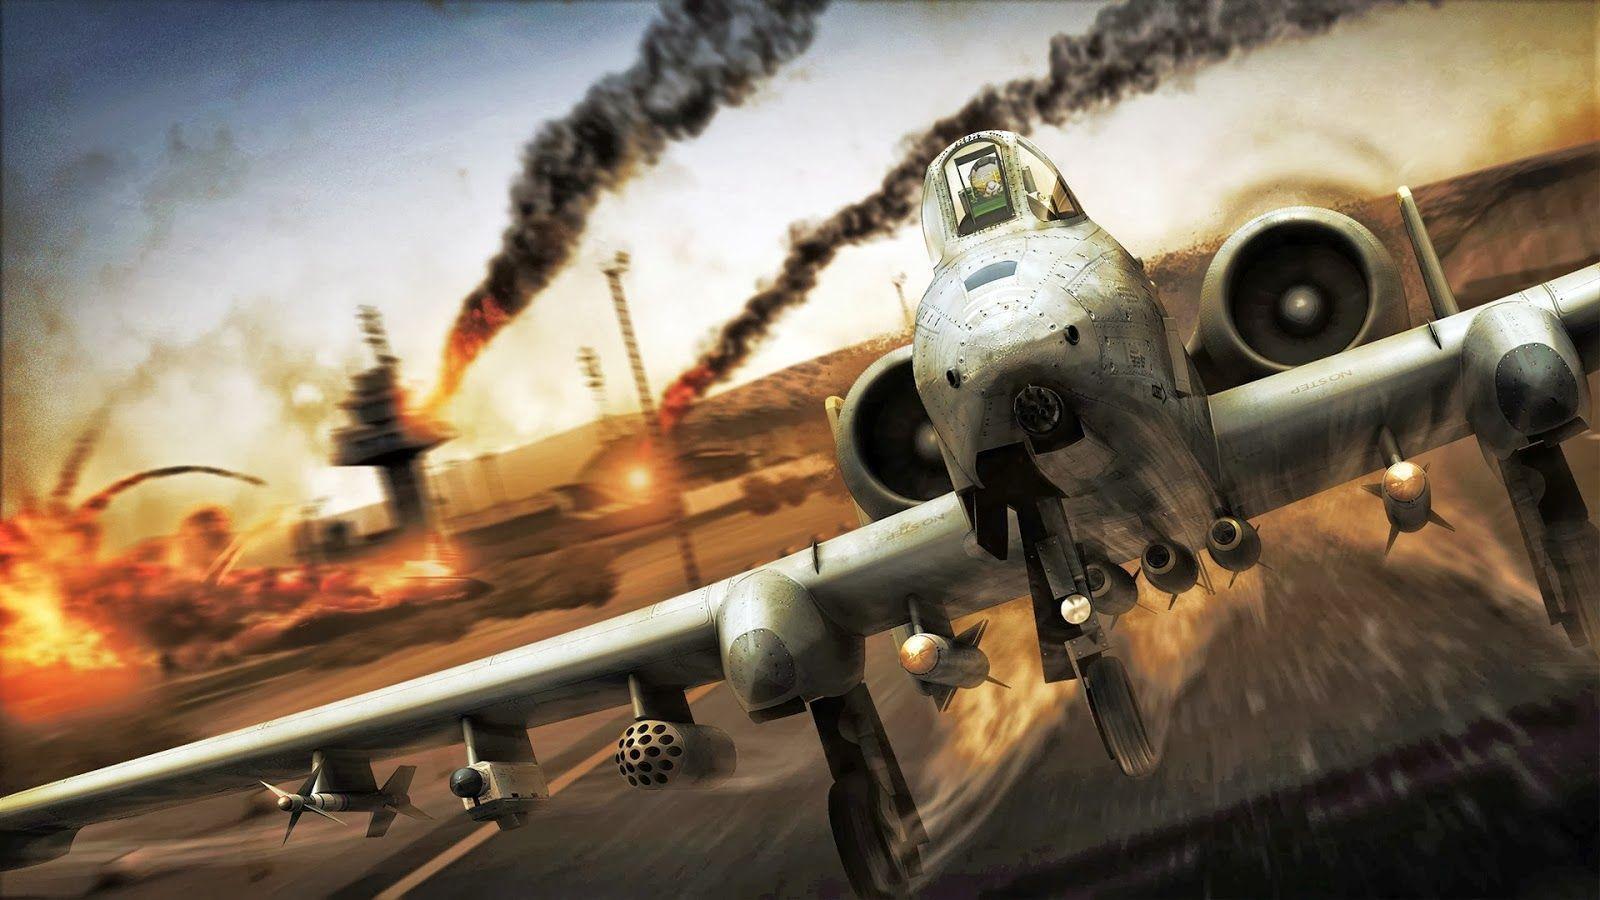 Fighter Plane Military Base Explosion x08 HD Wallpaper